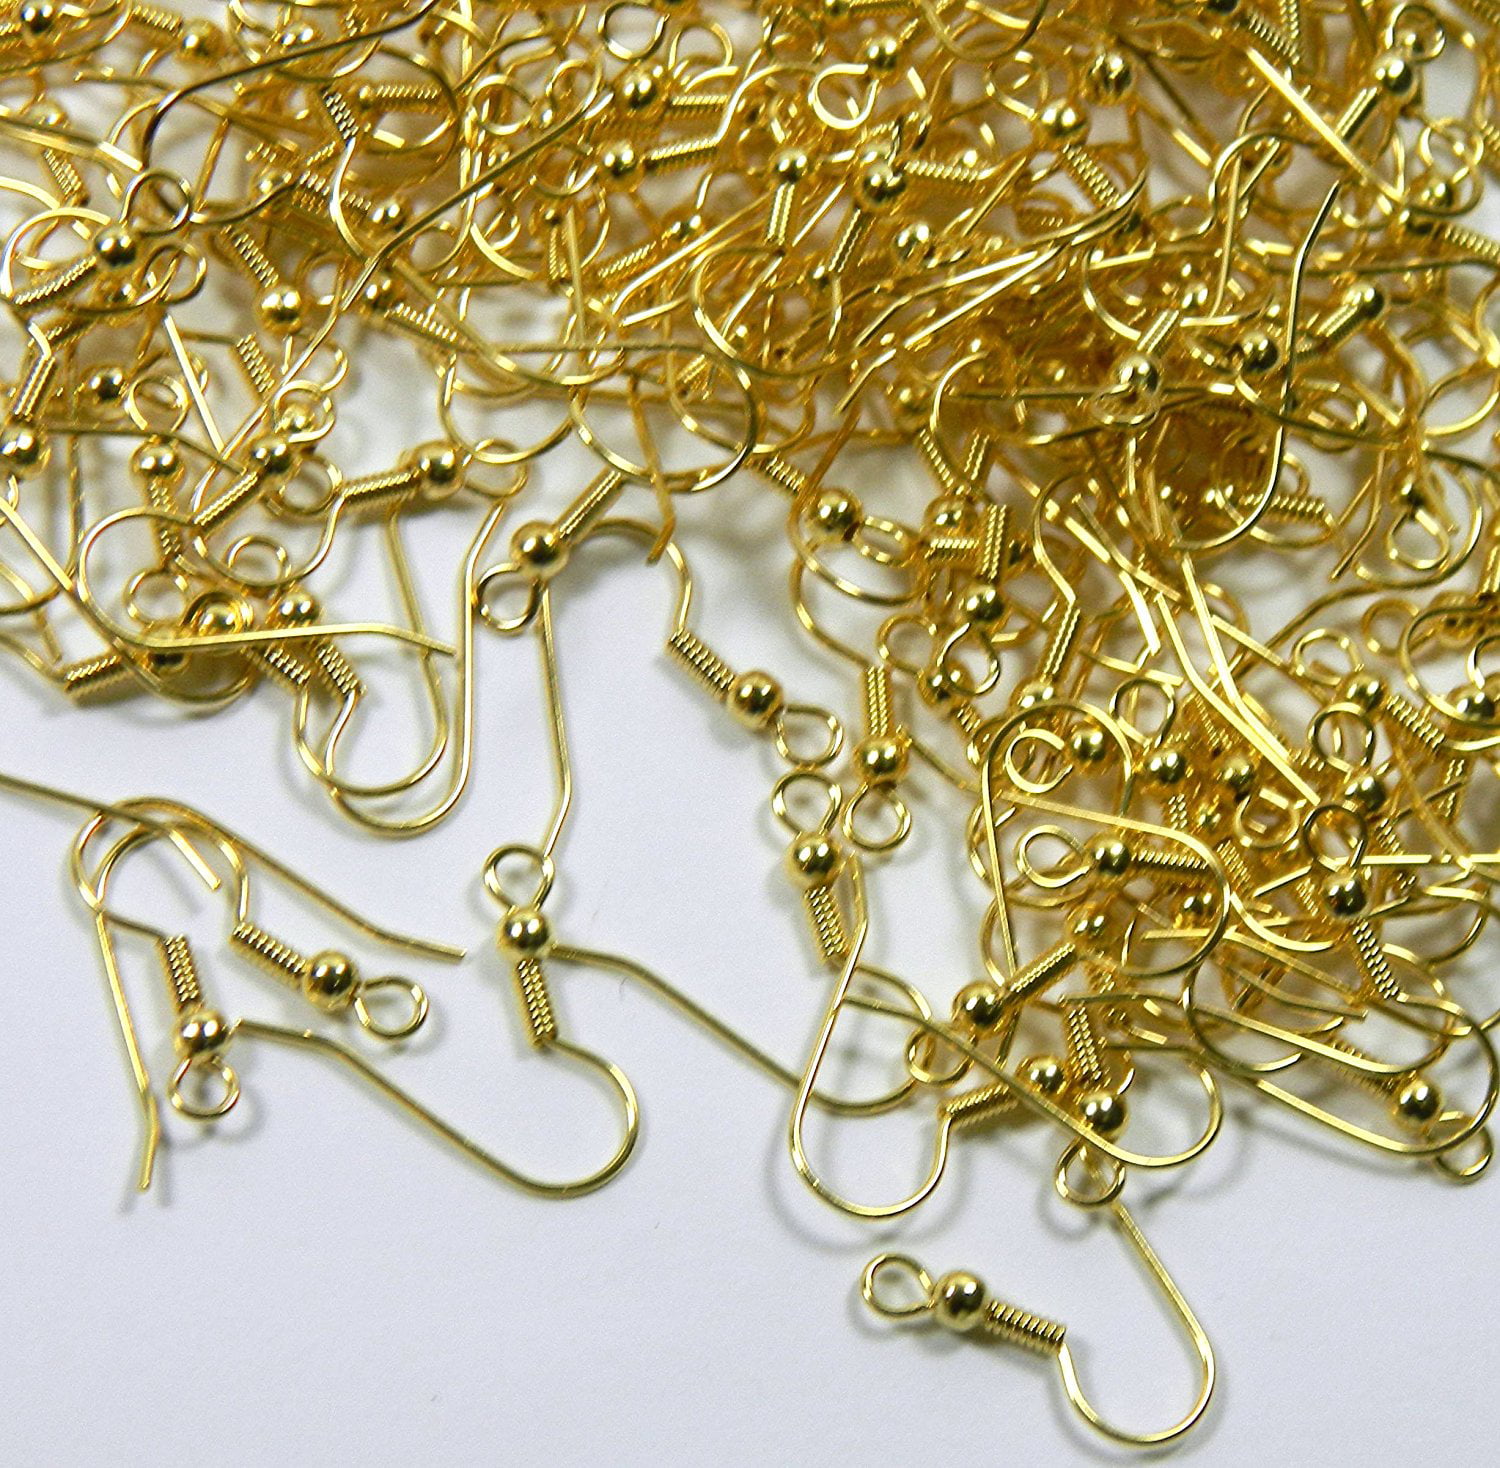 100 Gold Plated Surgical Steel Earwires Ear Wires 